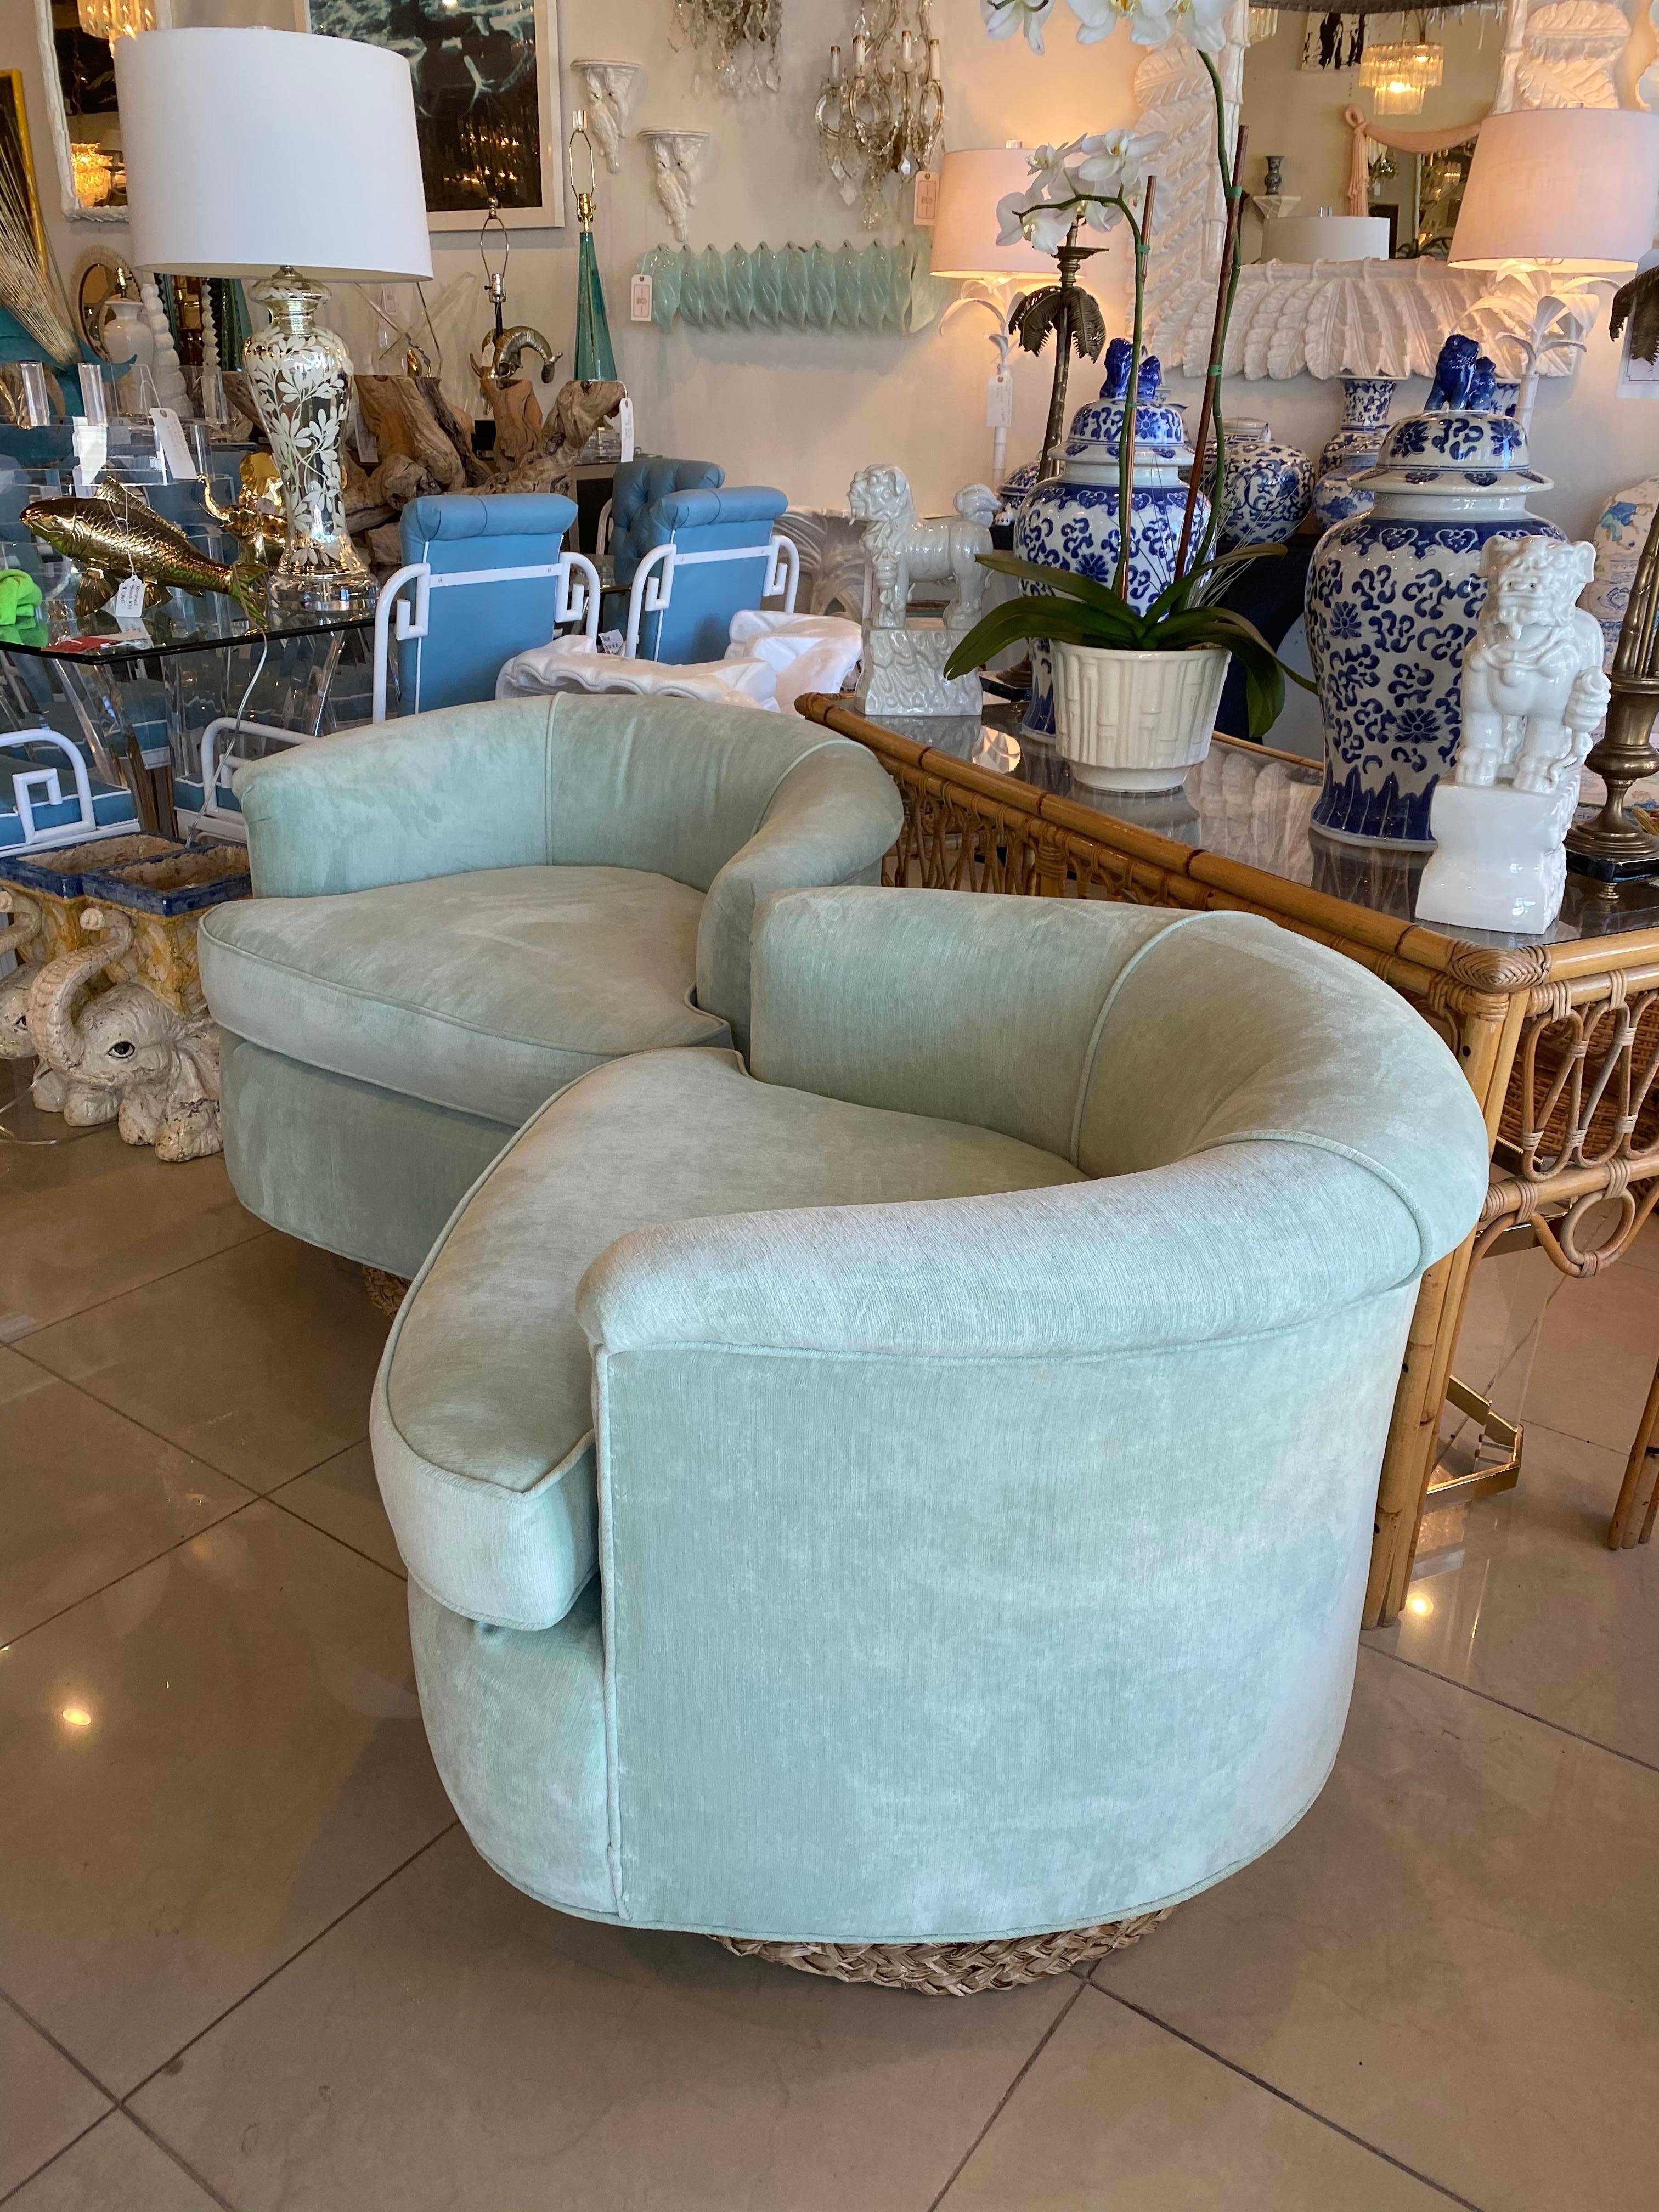 Pair of Vintage Barrel Swivel Chairs Upholstered Seafoam Green Seagrass Base 2